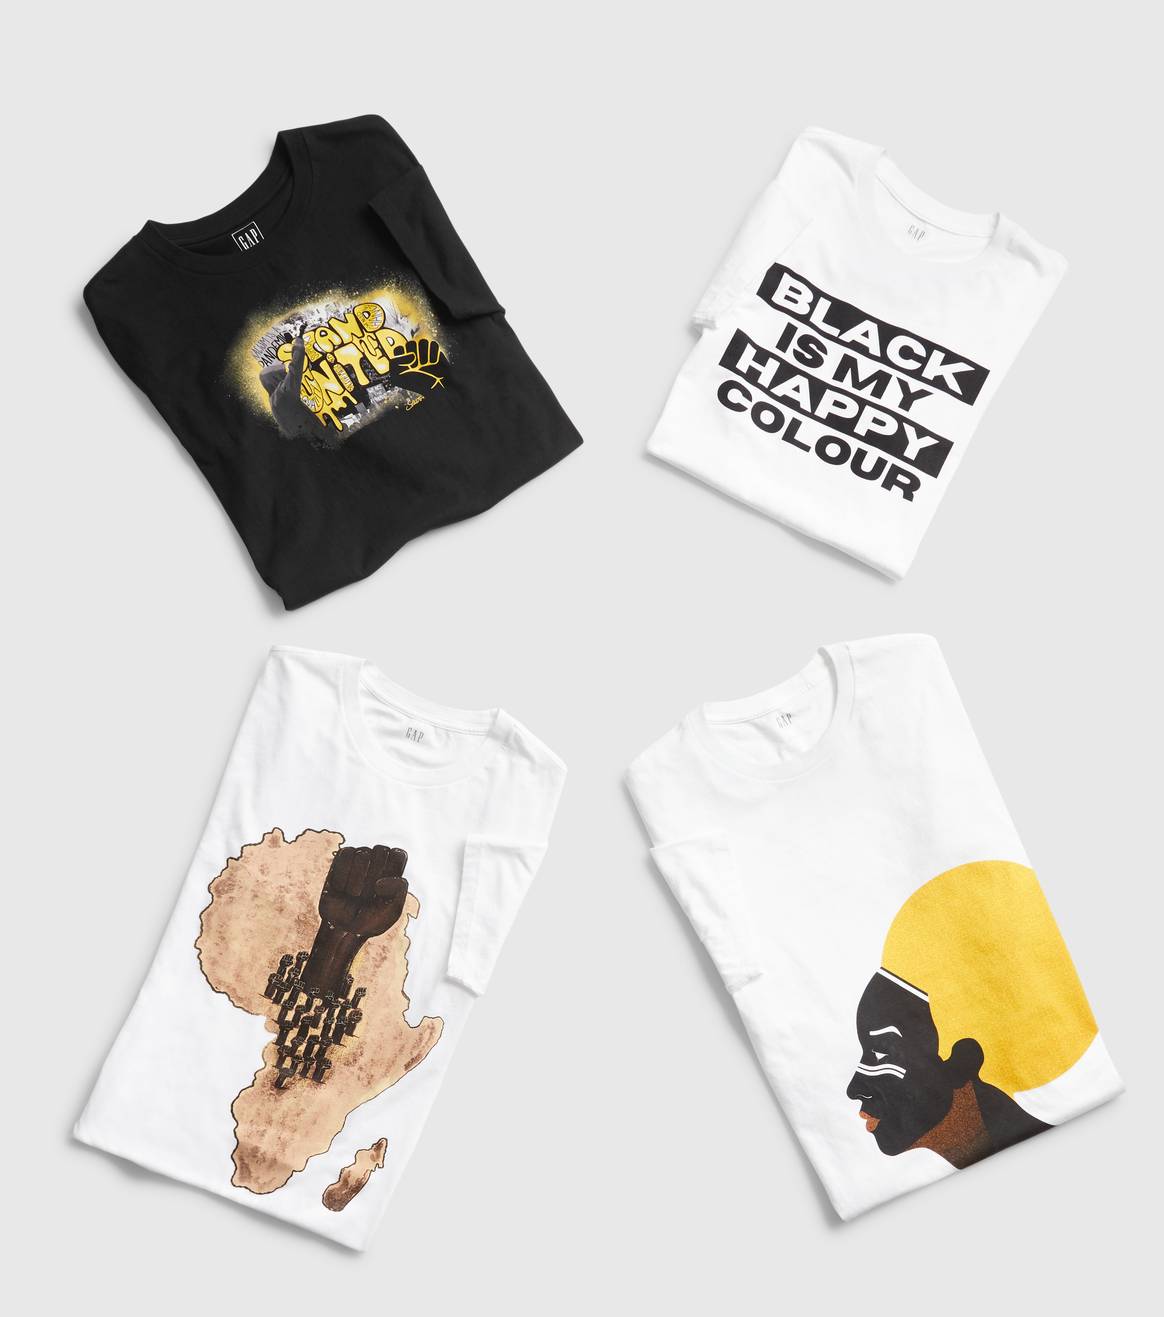 Gap supports Black History Month with T-shirt collaboration